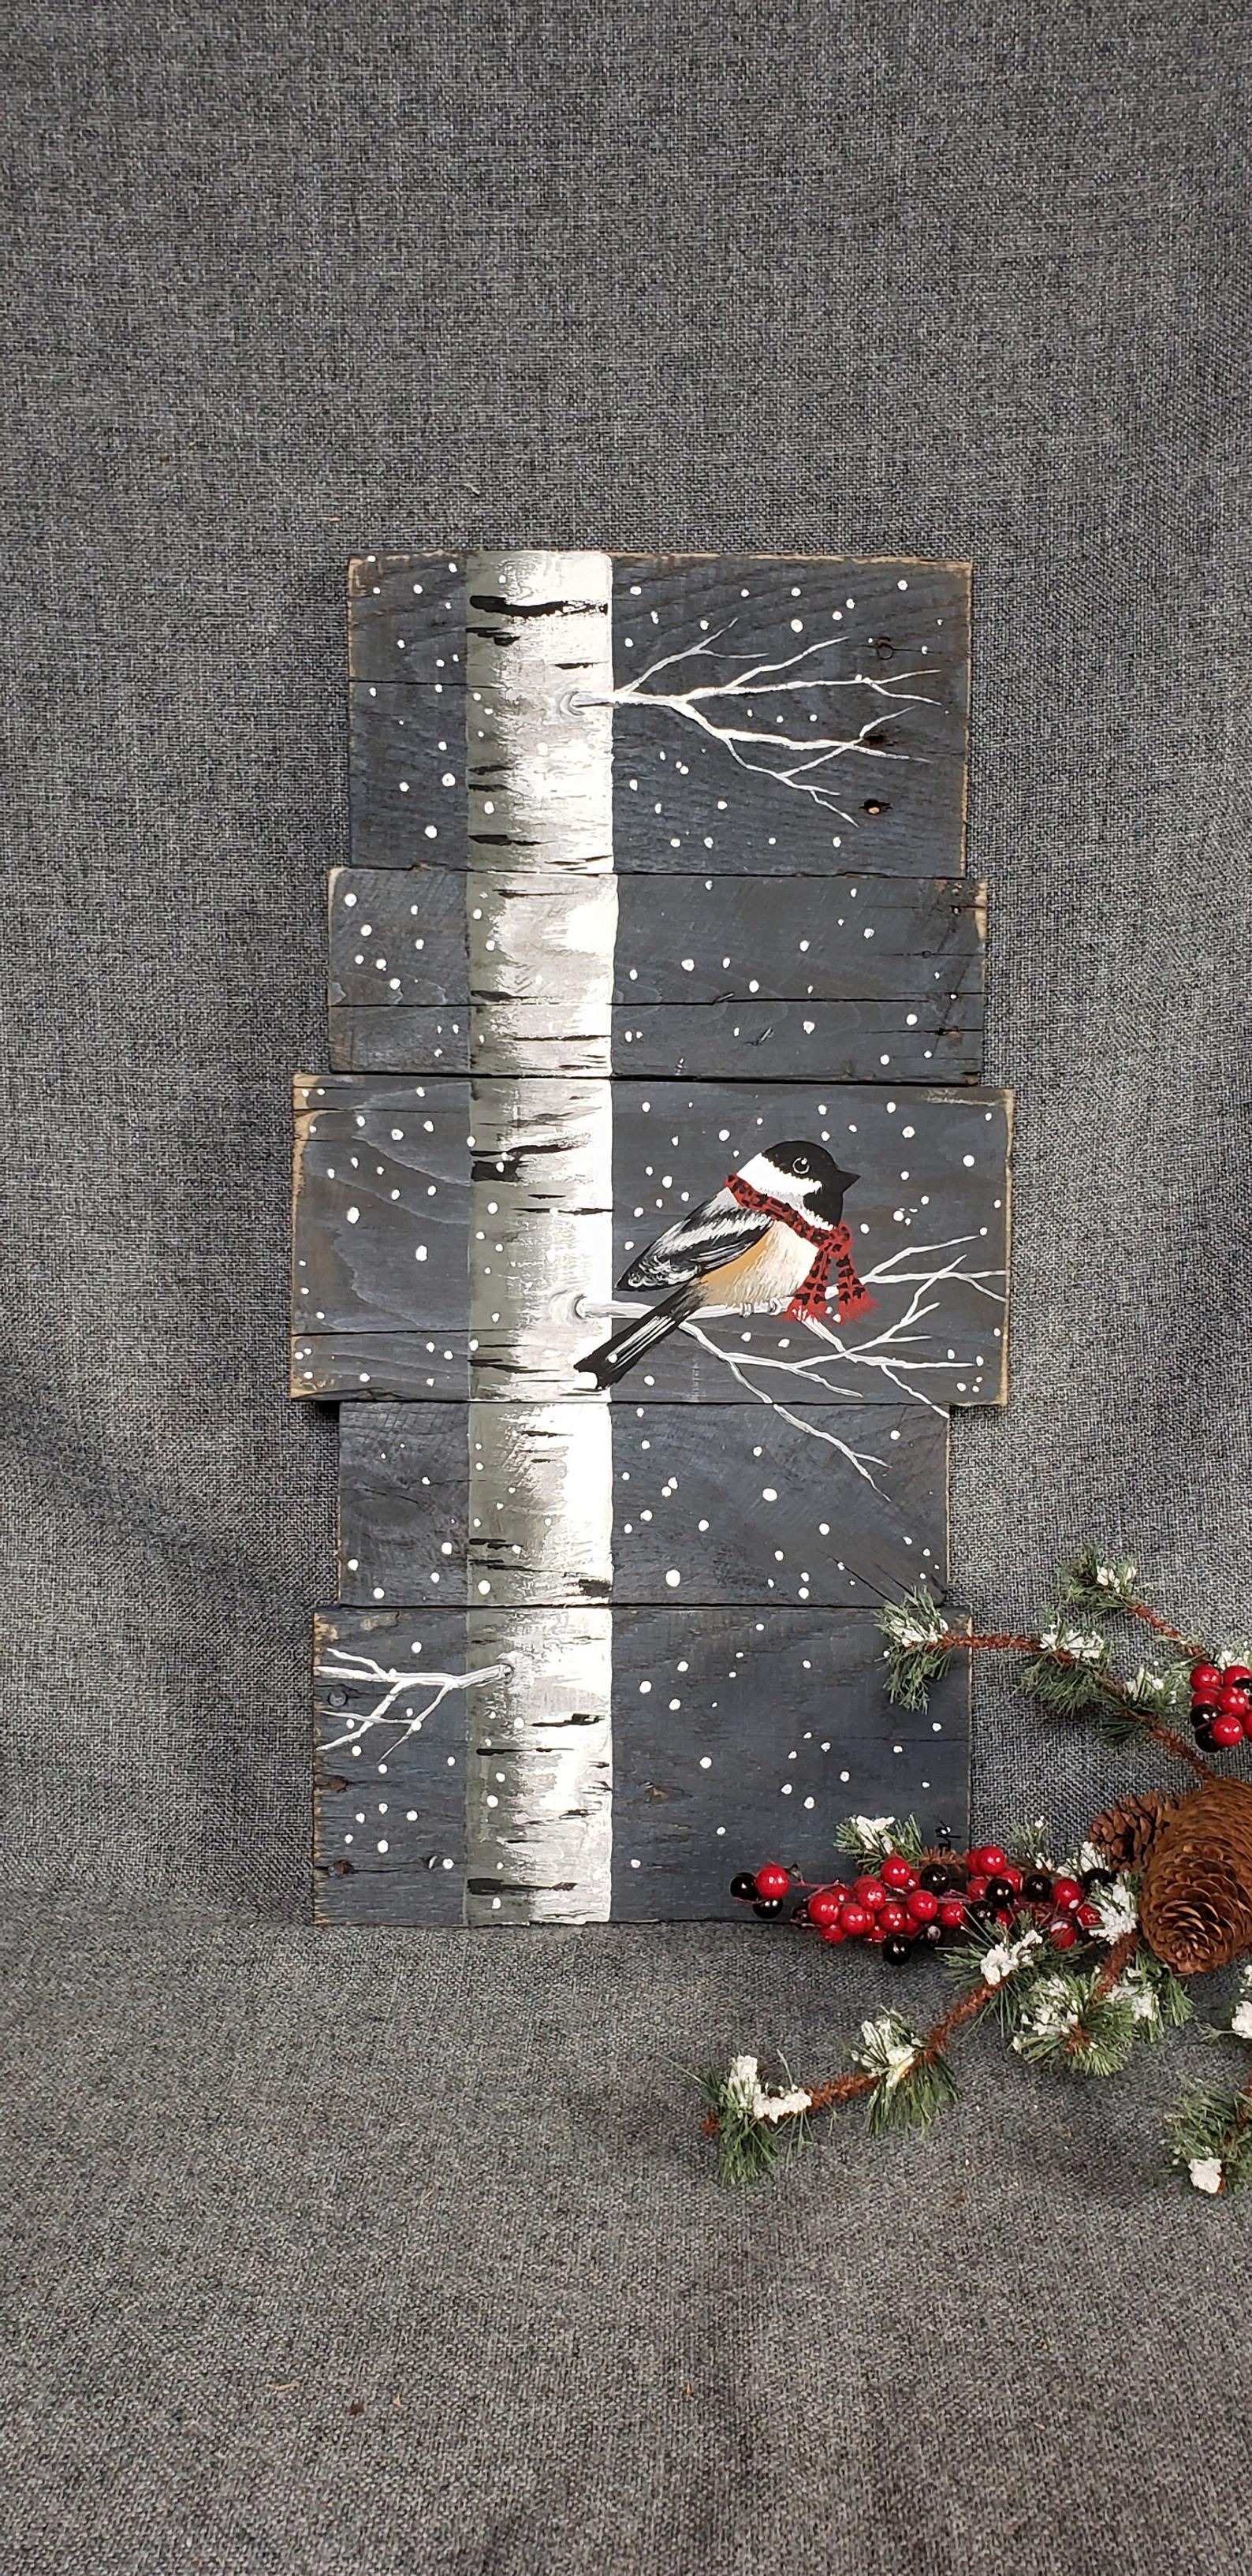 Bird With Red Plaid Scarf on White Birch Tree, Hand Painted Christmas Decor on Pallet Wood